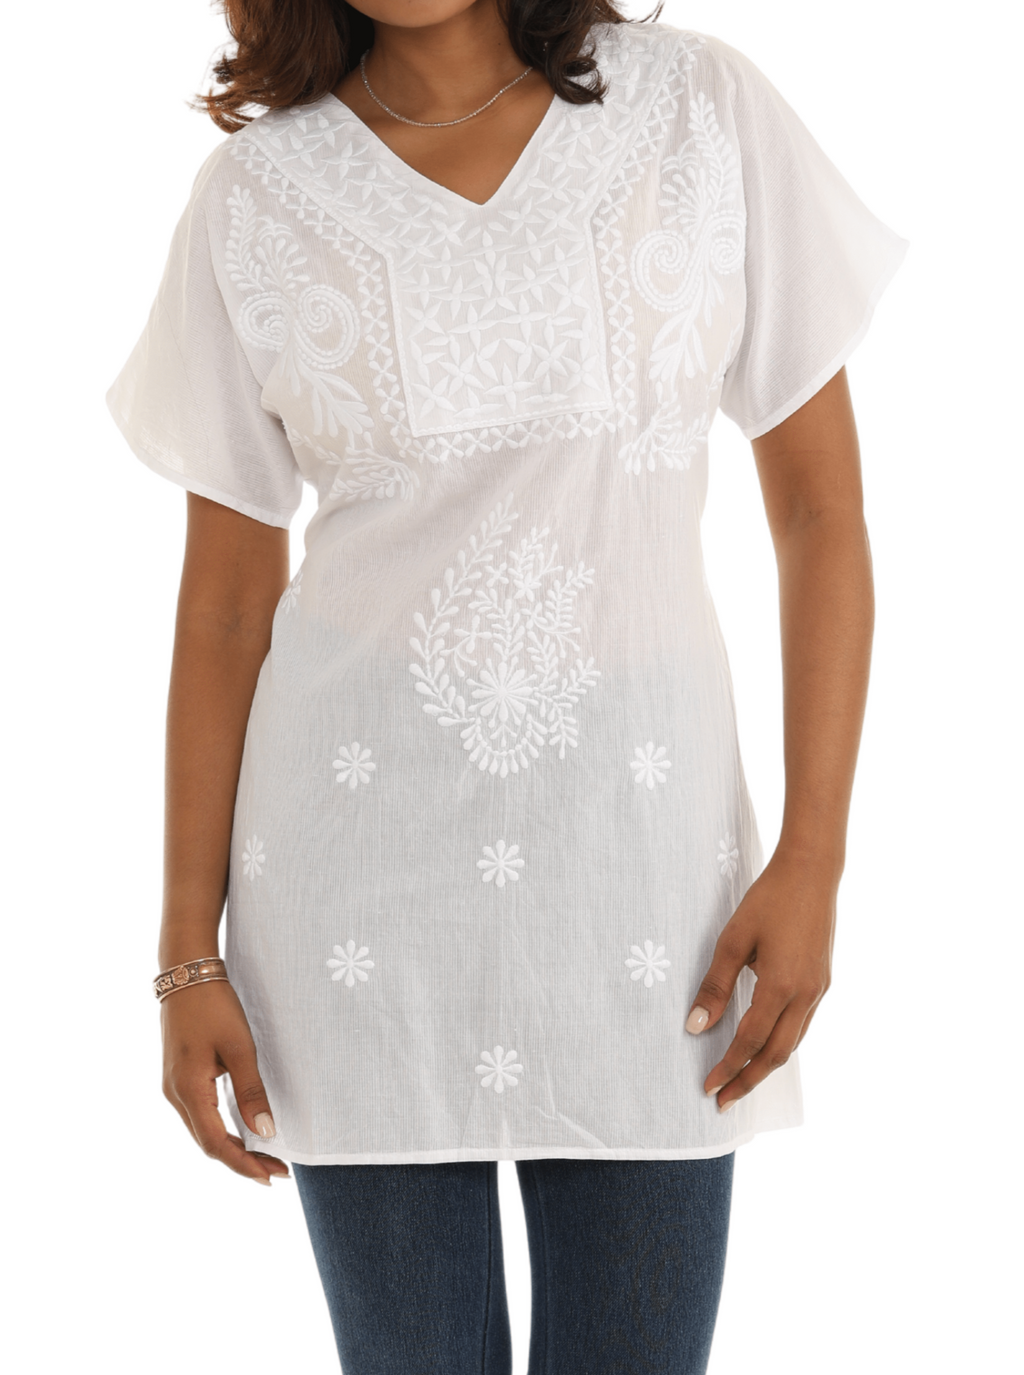 Self Textured Tunic For summers - Shoreline Wear, Inc.